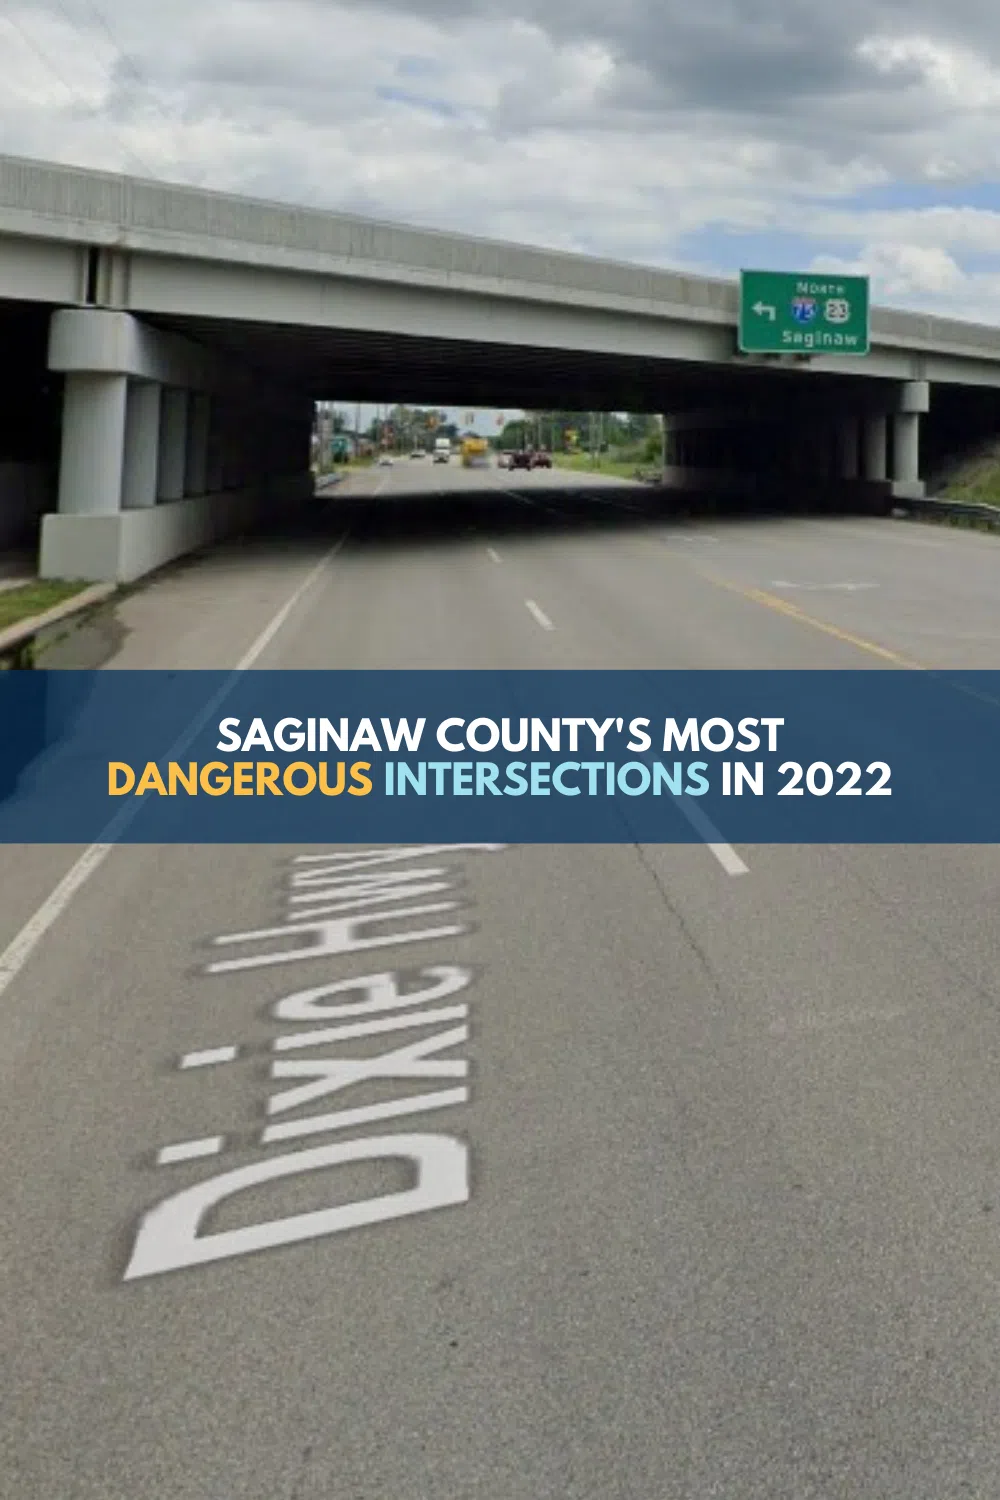 Saginaw County’s Most Dangerous Intersections in 2022